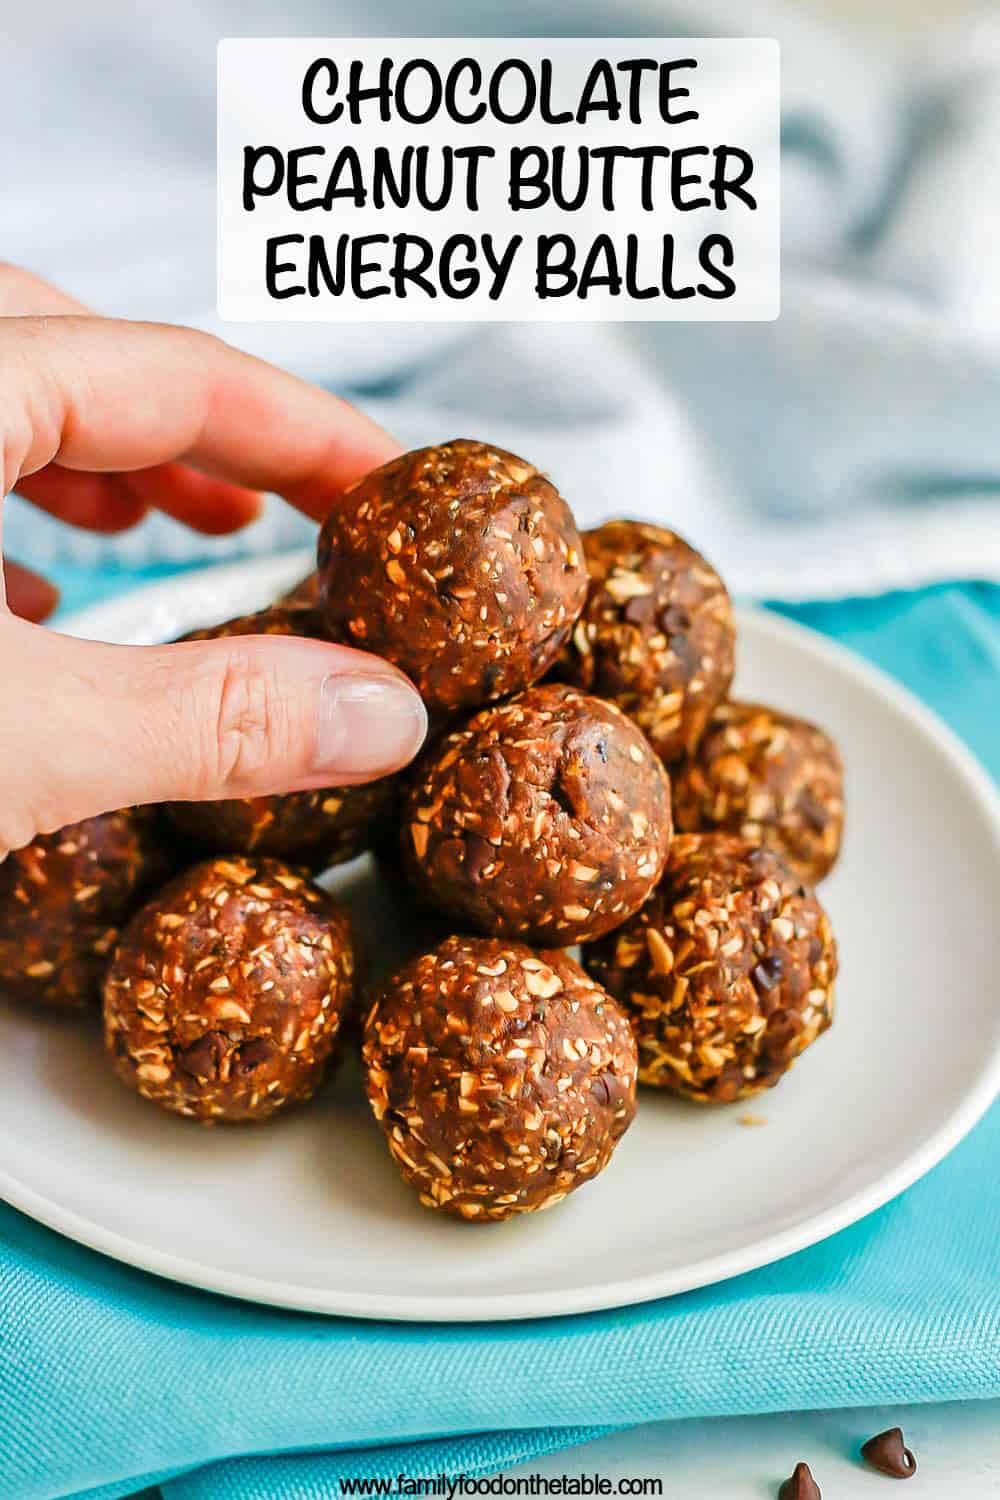 Chocolate peanut butter energy balls piled in a pyramid on a small white plate with a hand reaching for the top one and a text overlay on the photo